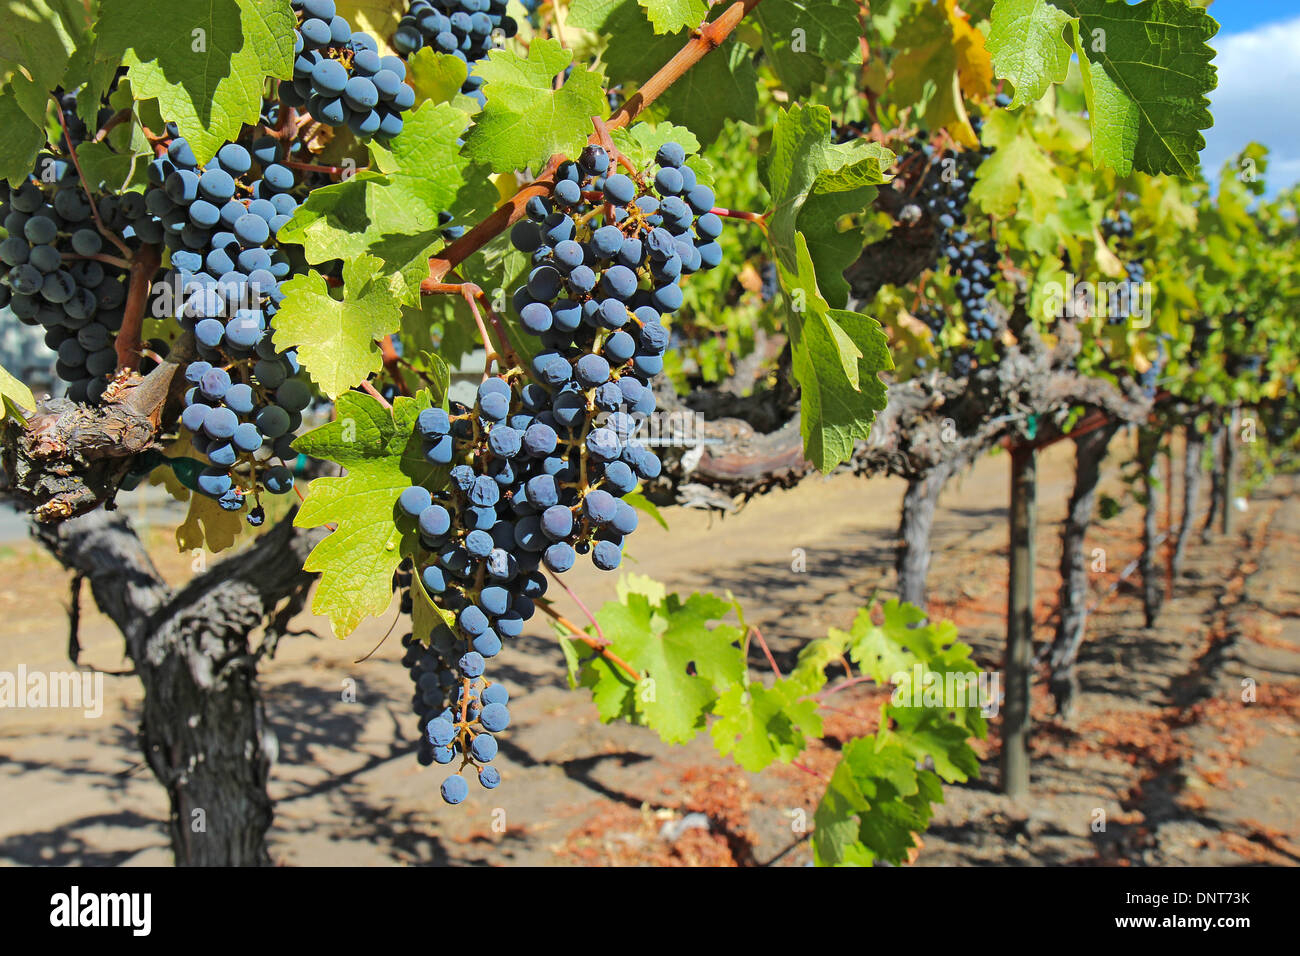 A shallow depth of field highlights ripe, purple wine grapes at a vineyard in the Napa Valley near Calistoga, California Stock Photo